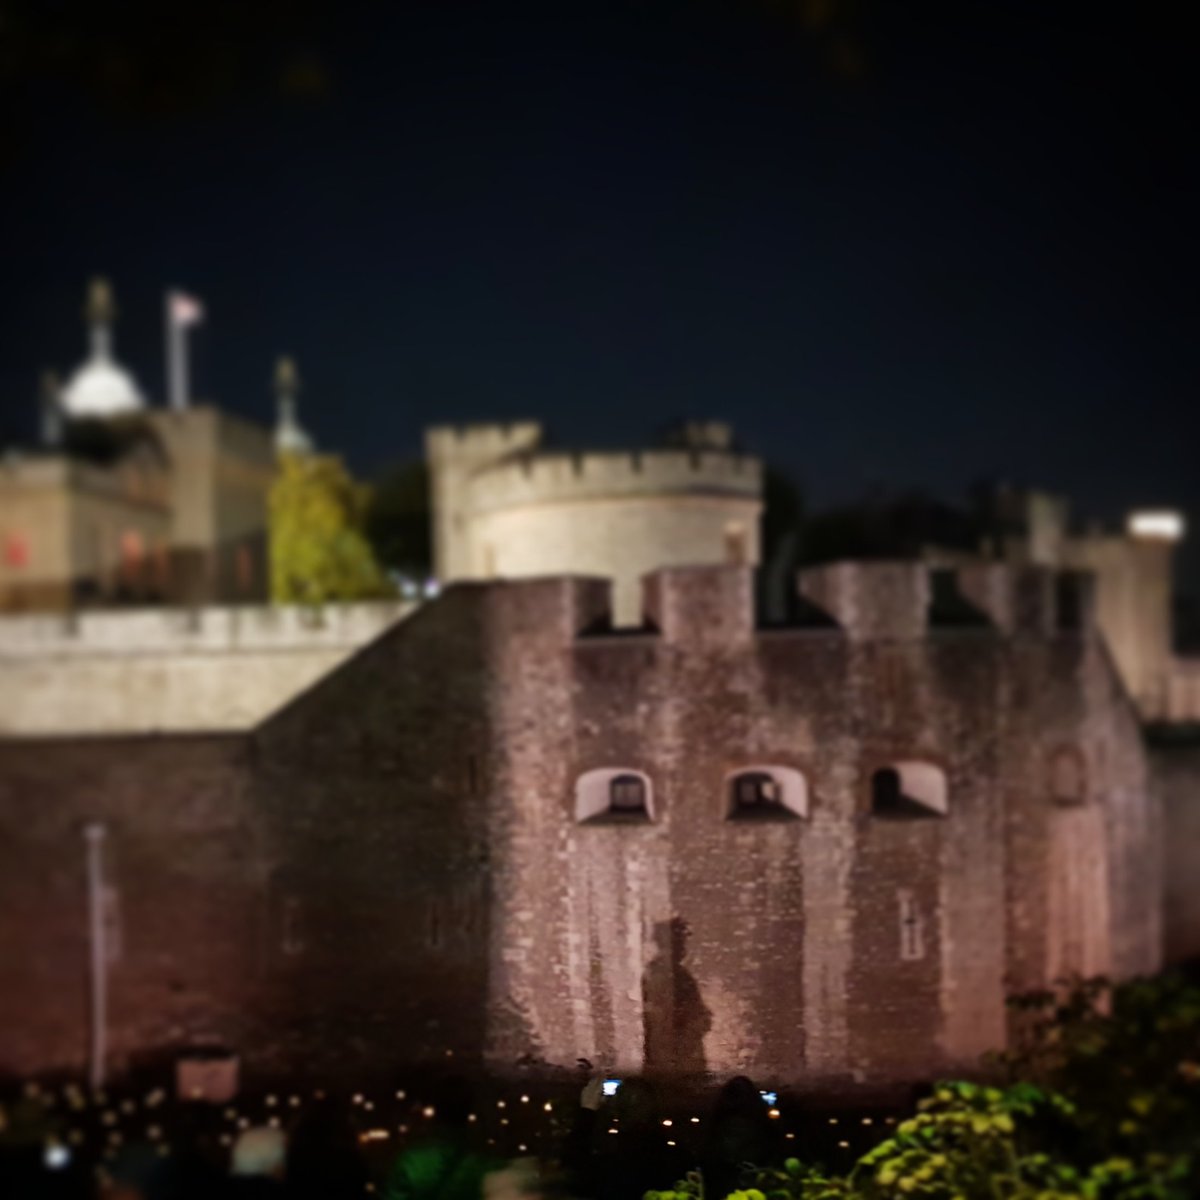 Amazing experience visiting #BeyondTheDeepeningShadows @TowerOfLondon last night. A very moving tribute to the fallen.